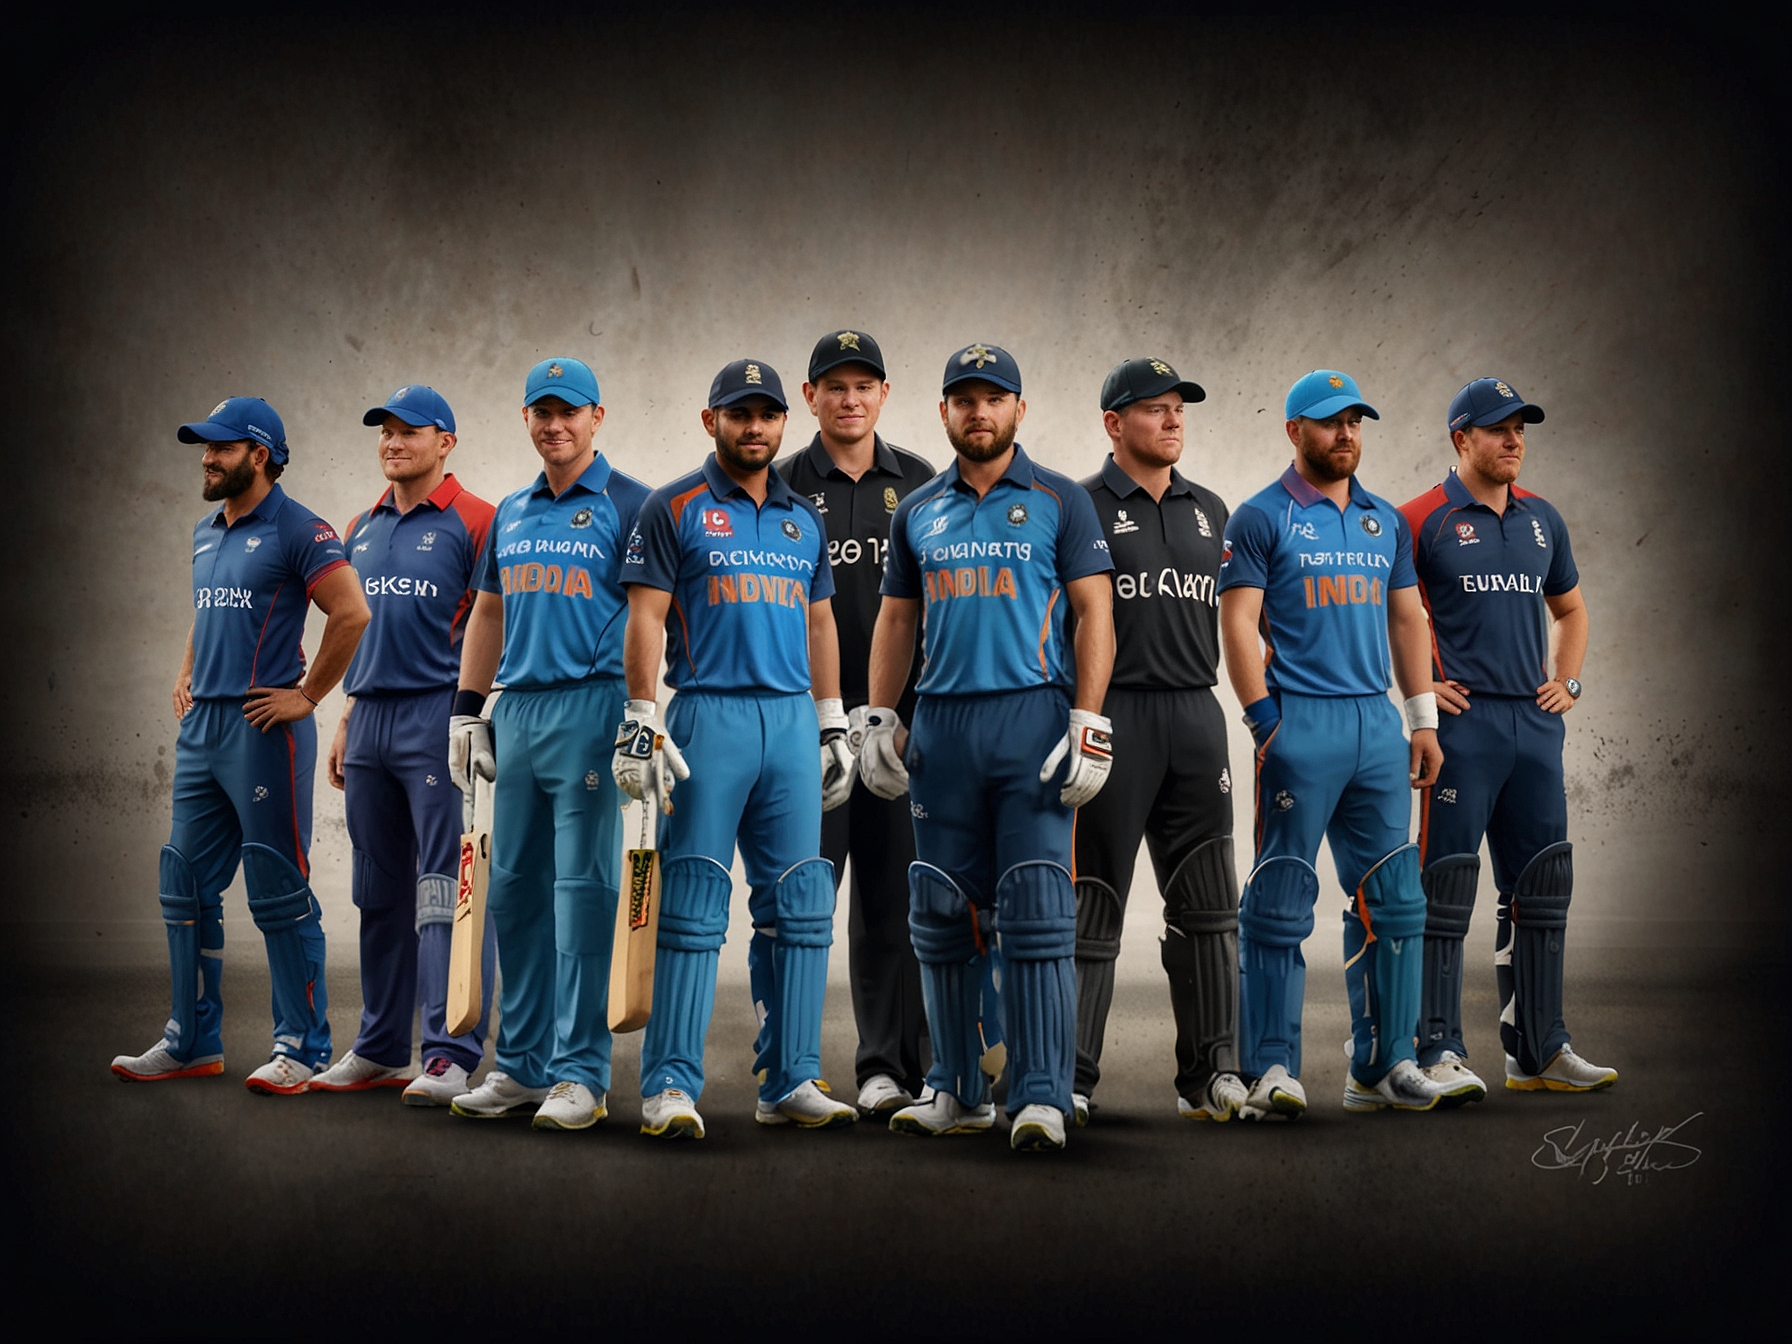 An illustration showing all eight teams that have made it to the Super Eight stage, featuring team logos and star players like Aaron Finch, Virat Kohli, and Eoin Morgan.